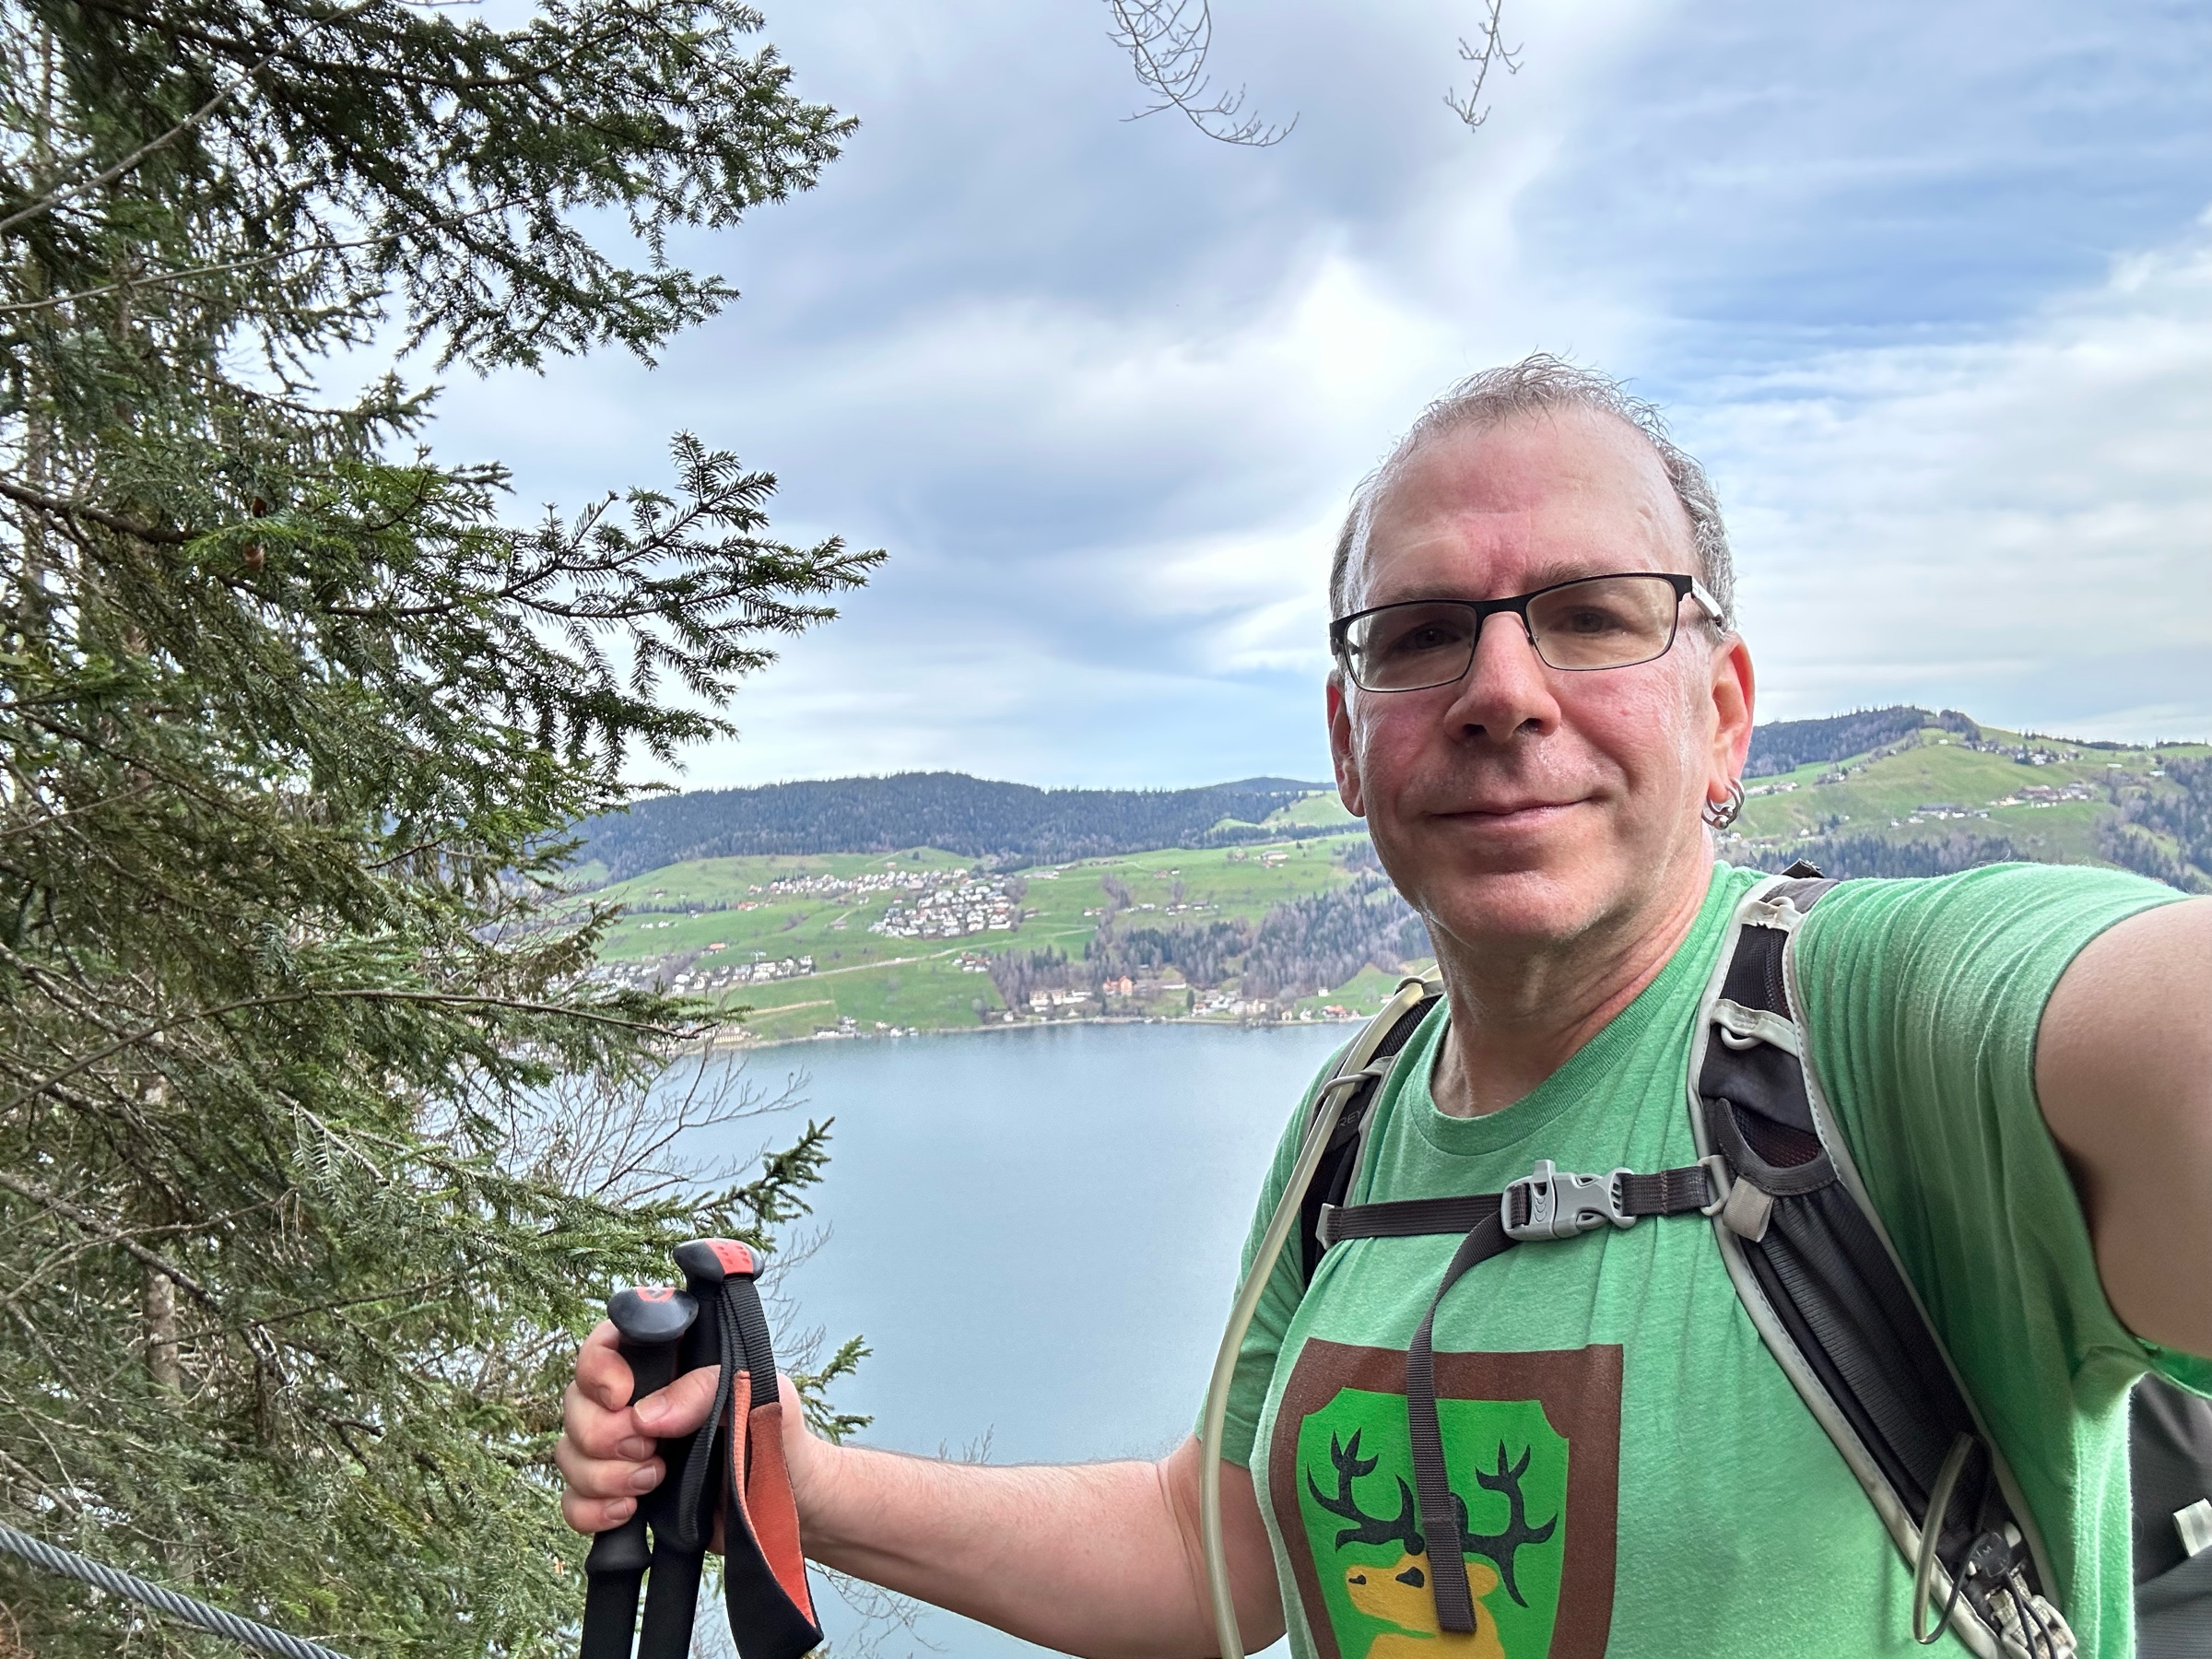 Selfie of a man with a backpack and hiking poles in front of a lake.